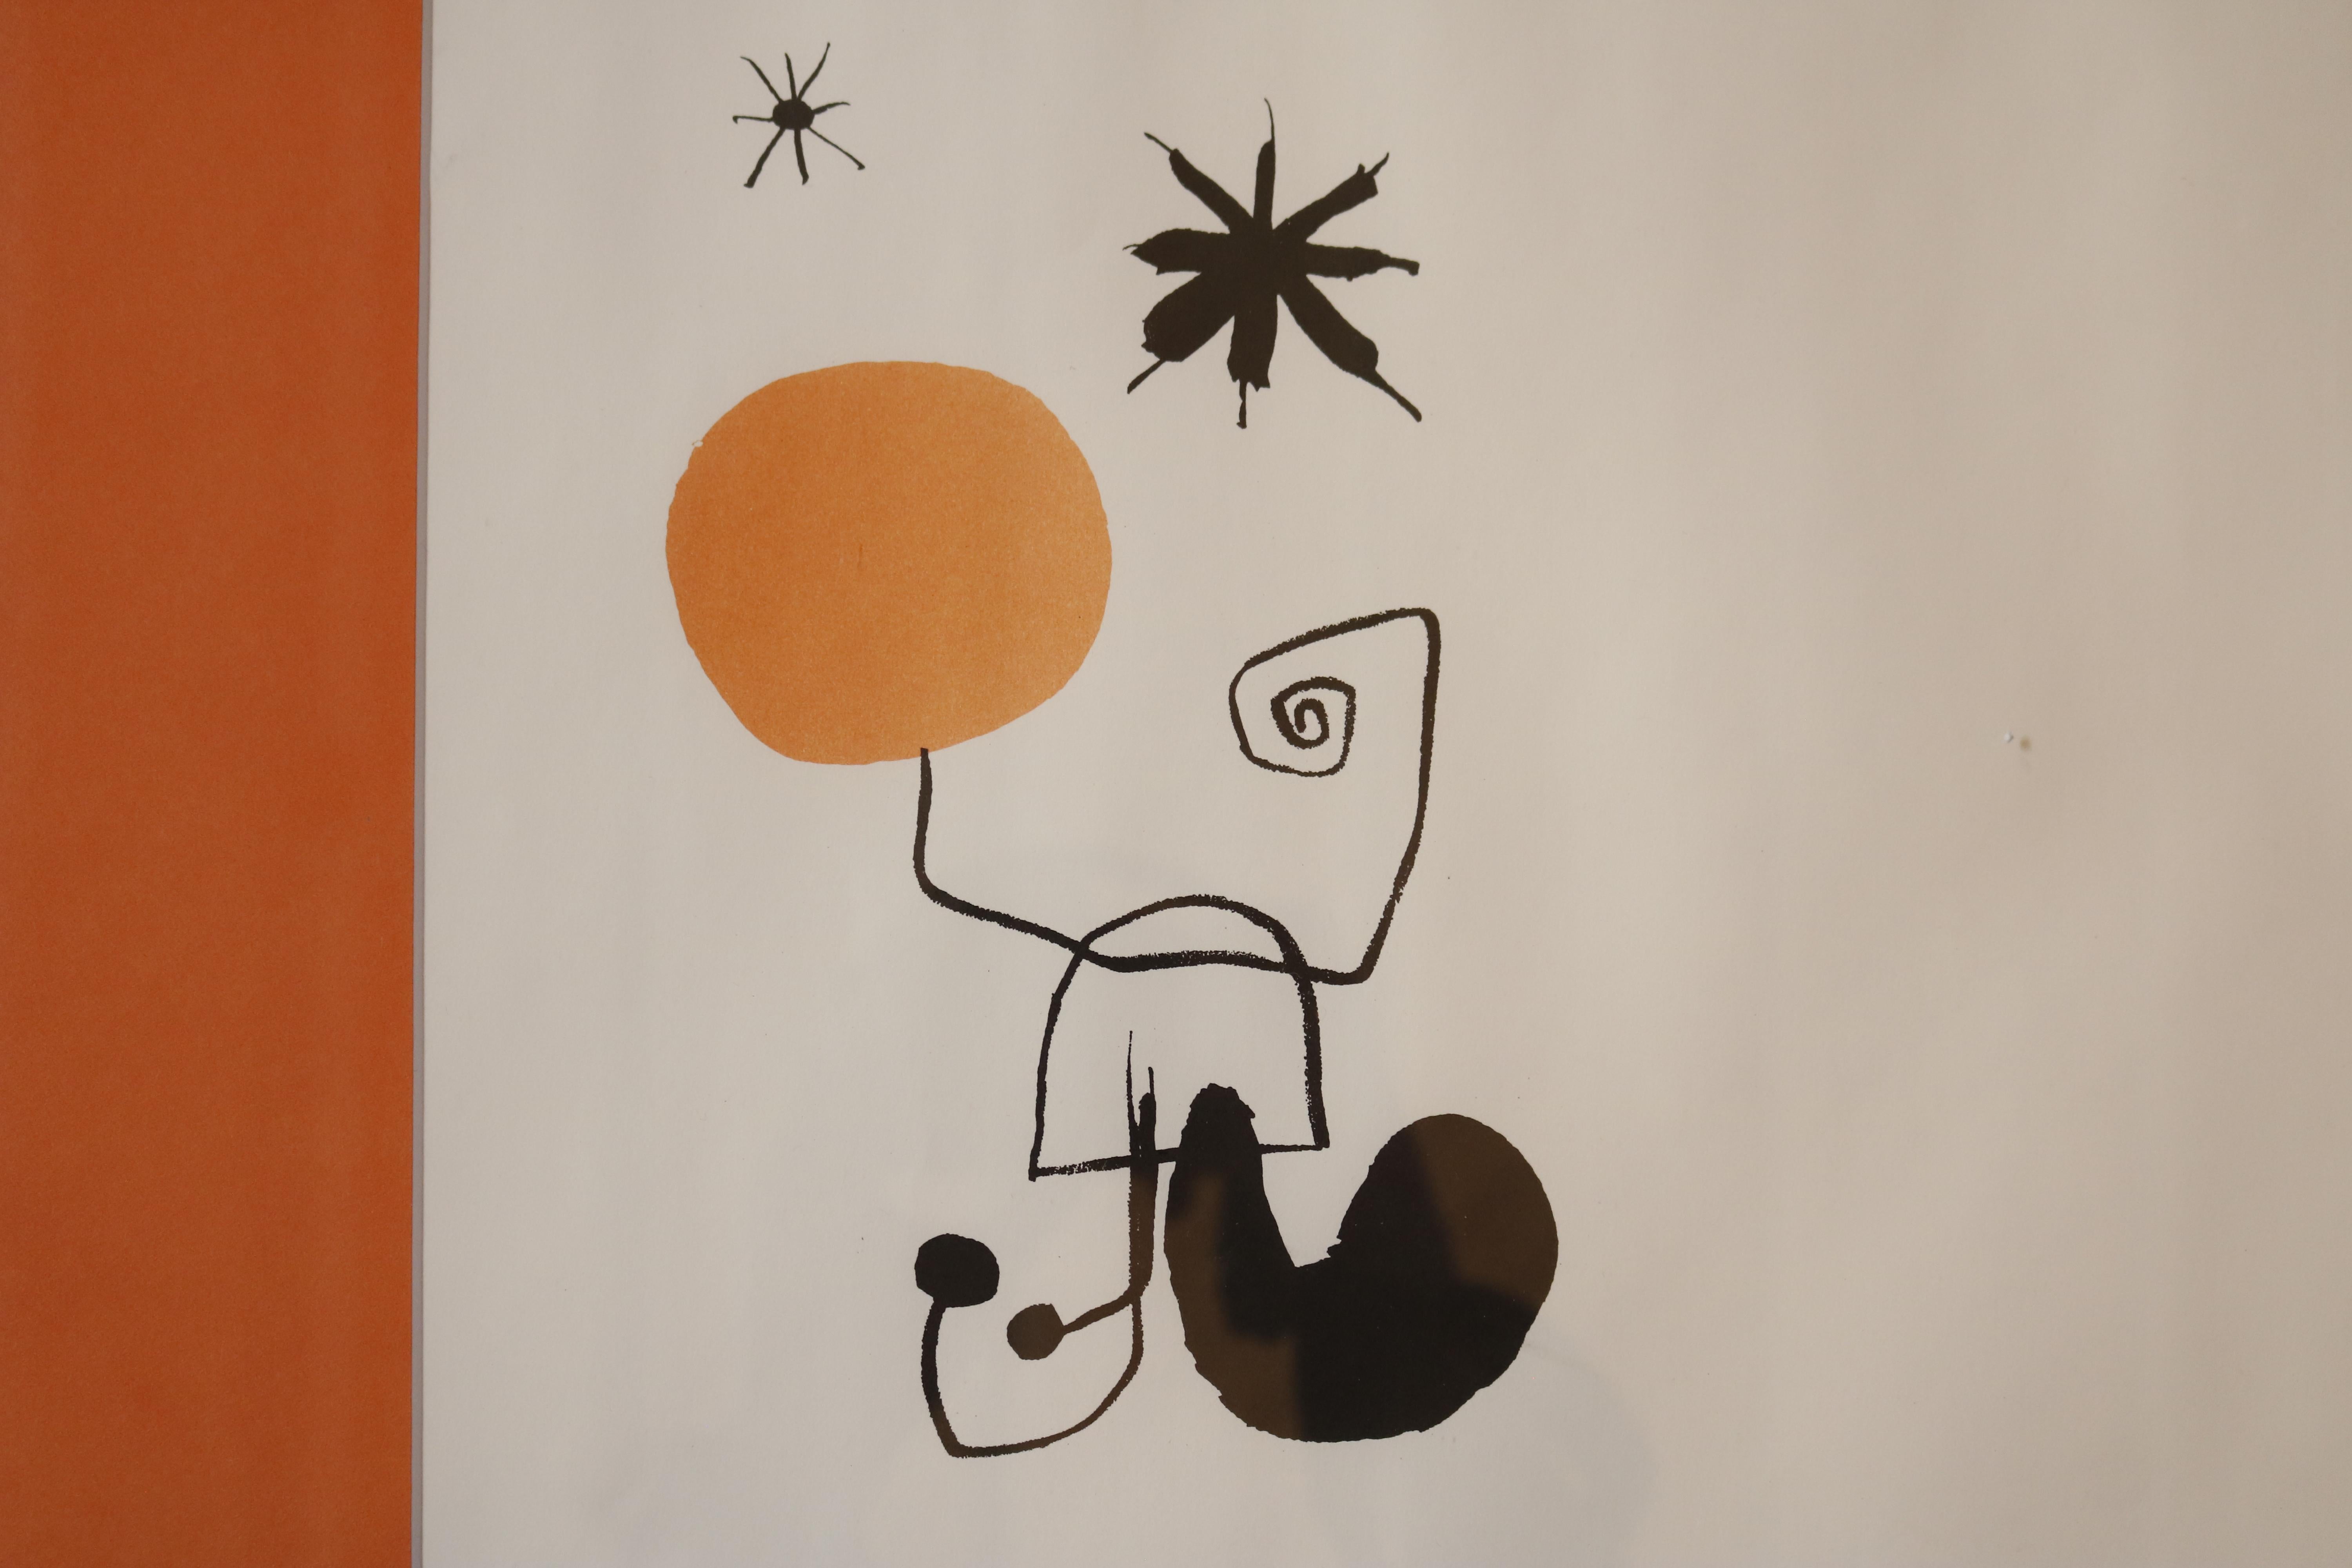 An intriguing, abstract lithograph depicting strange figures and the inscription 